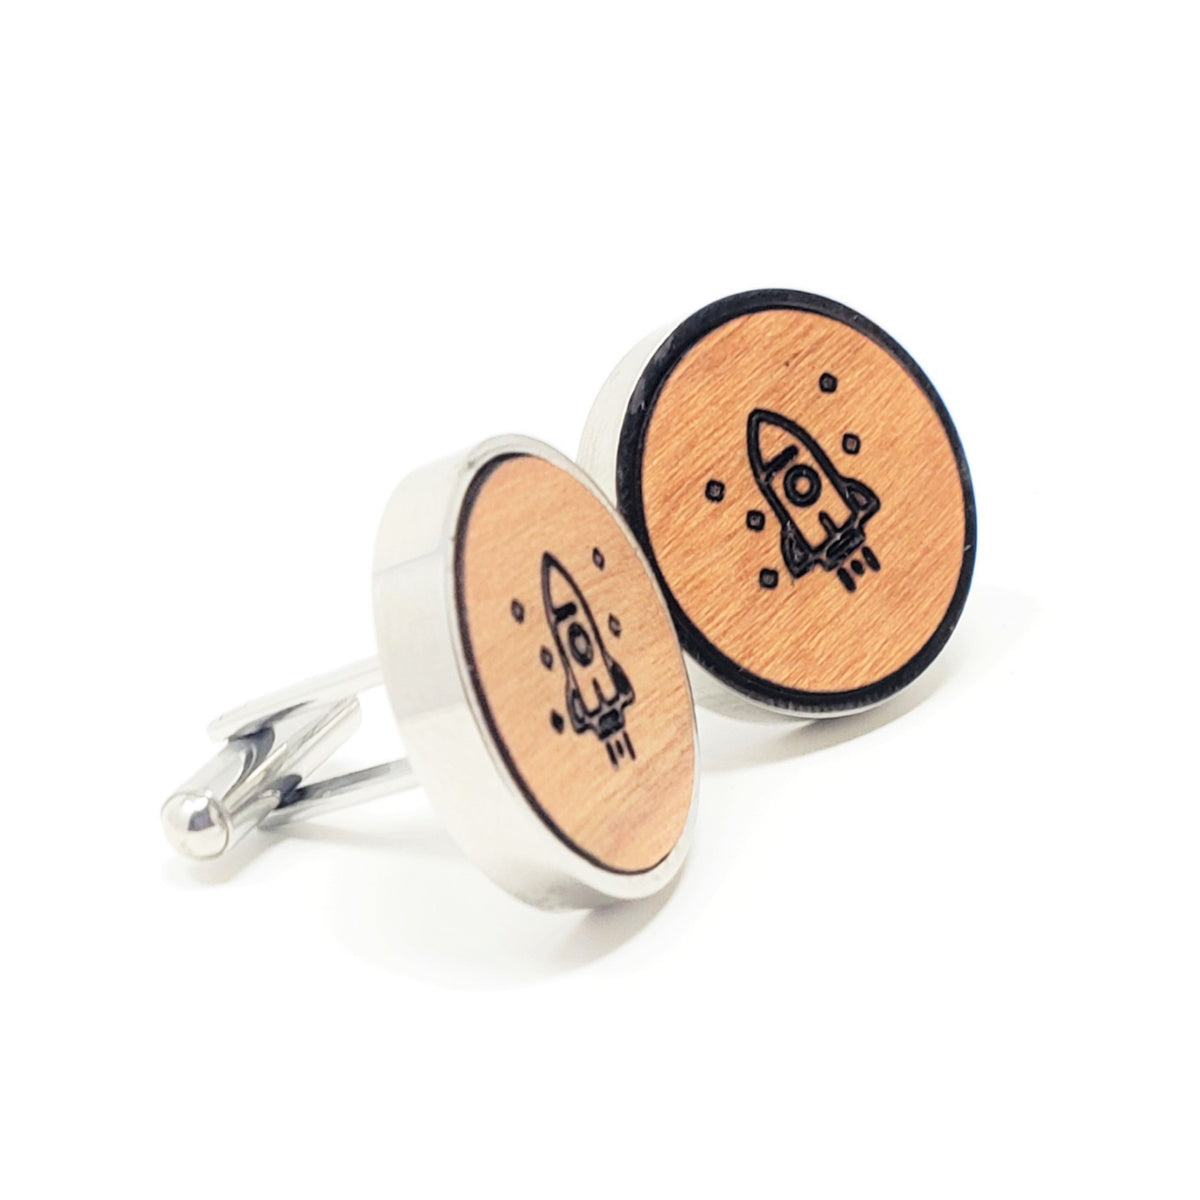 Rocket Ship Stainless and Wood Cufflinks